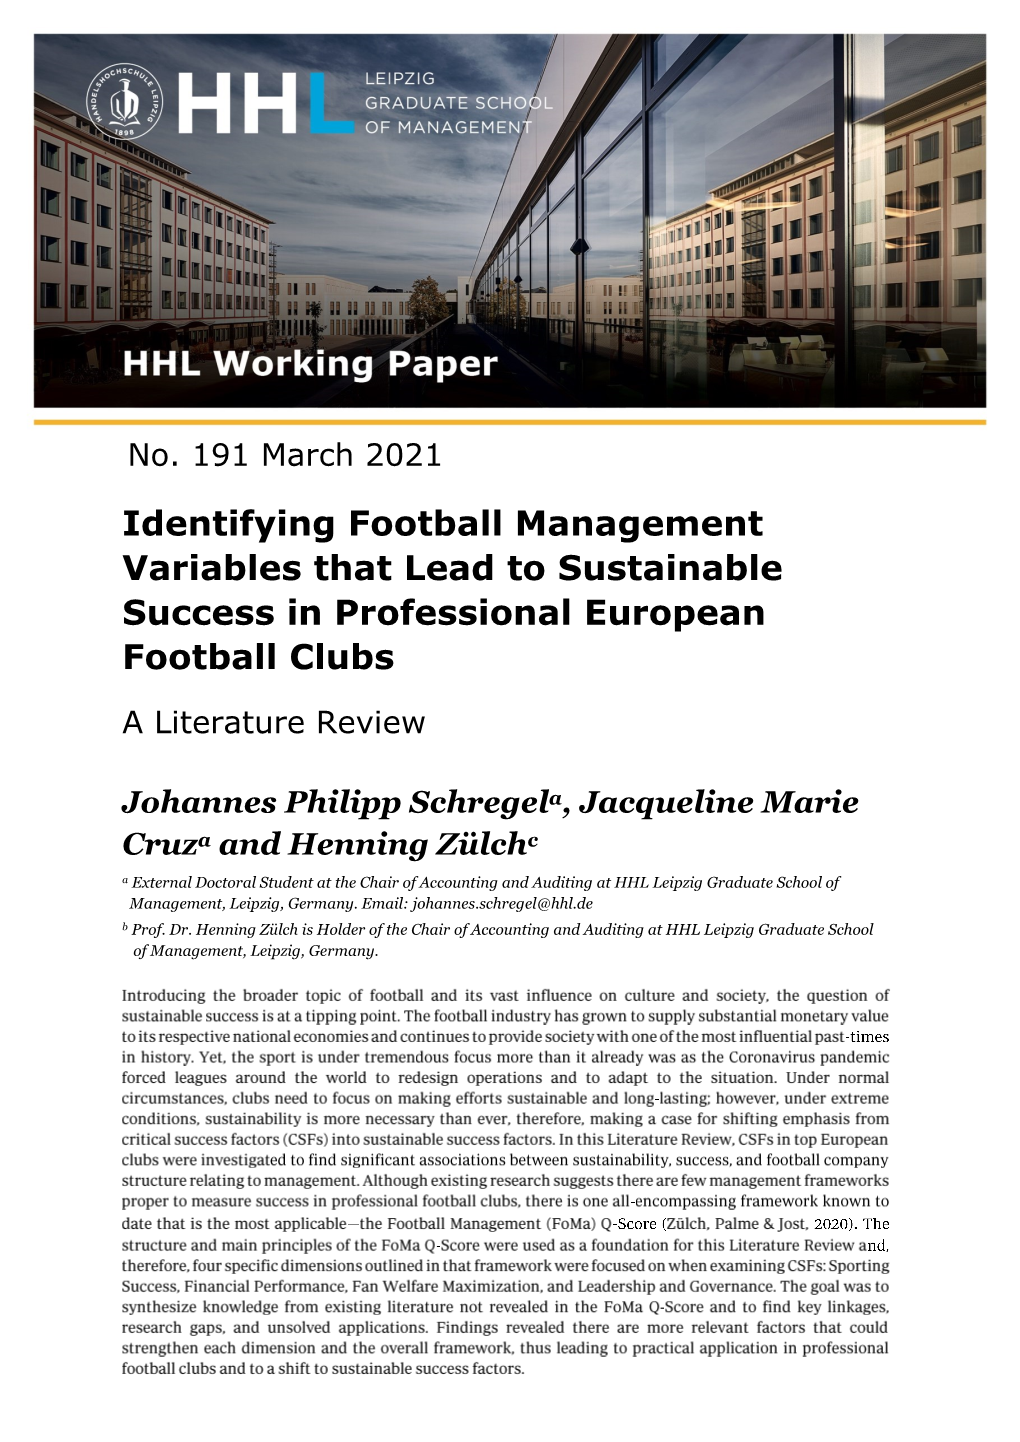 Identifying Football Management Variables That Lead to Sustainable Success in Professional European